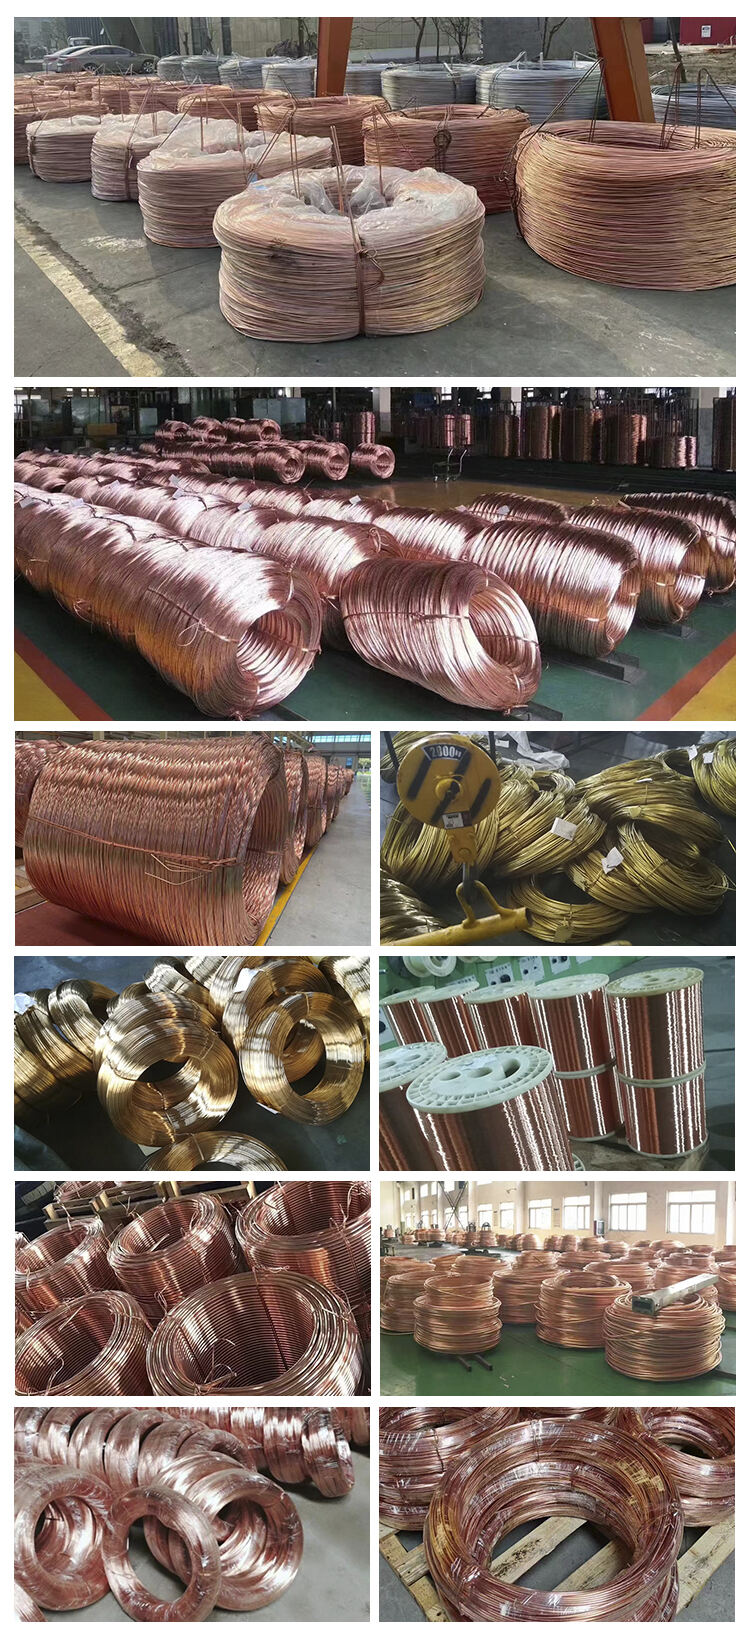 h59 h62 h63 h65 h68 h70 h80 brass wire factory